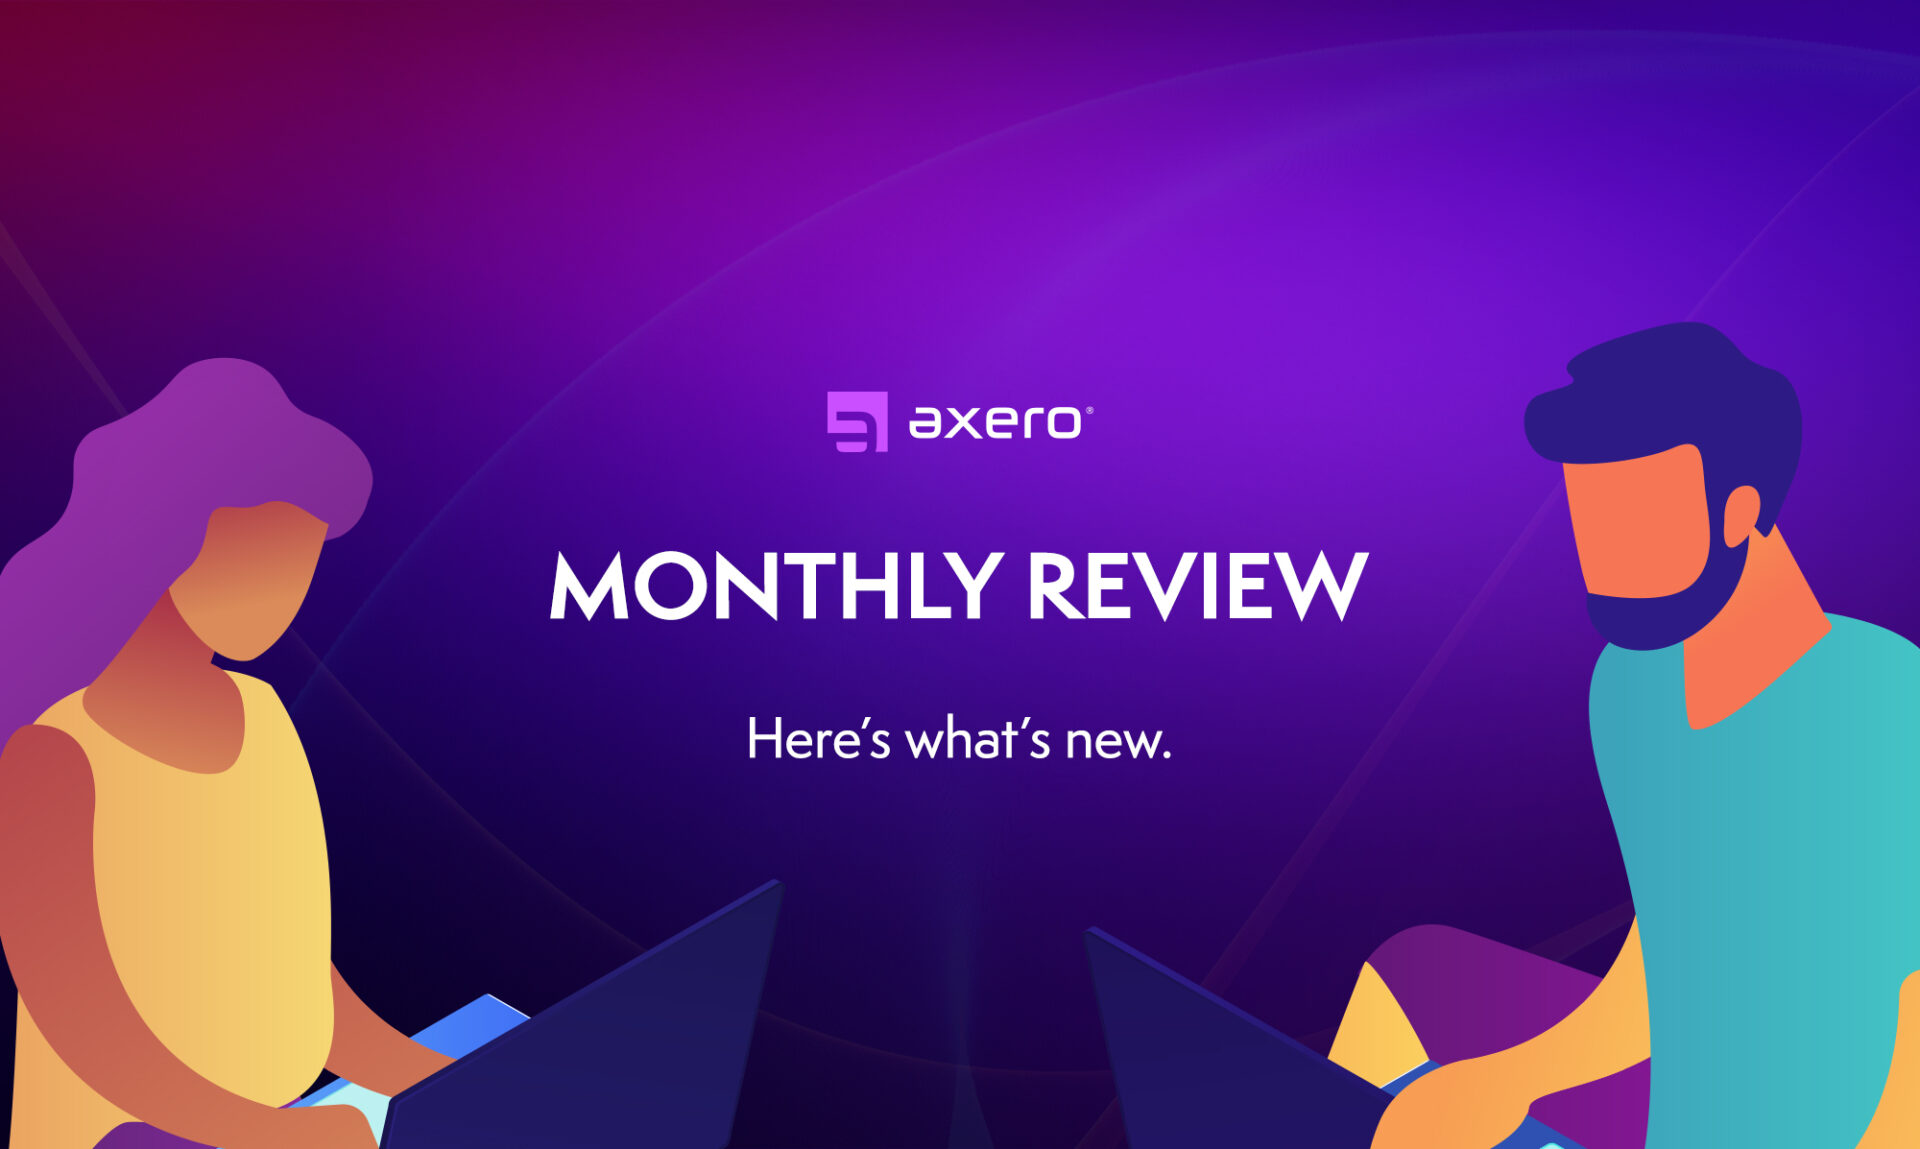 Axero Named Top Performer, New Dark Mode for Intranet Mobile App, and Leverage Power of Storytelling